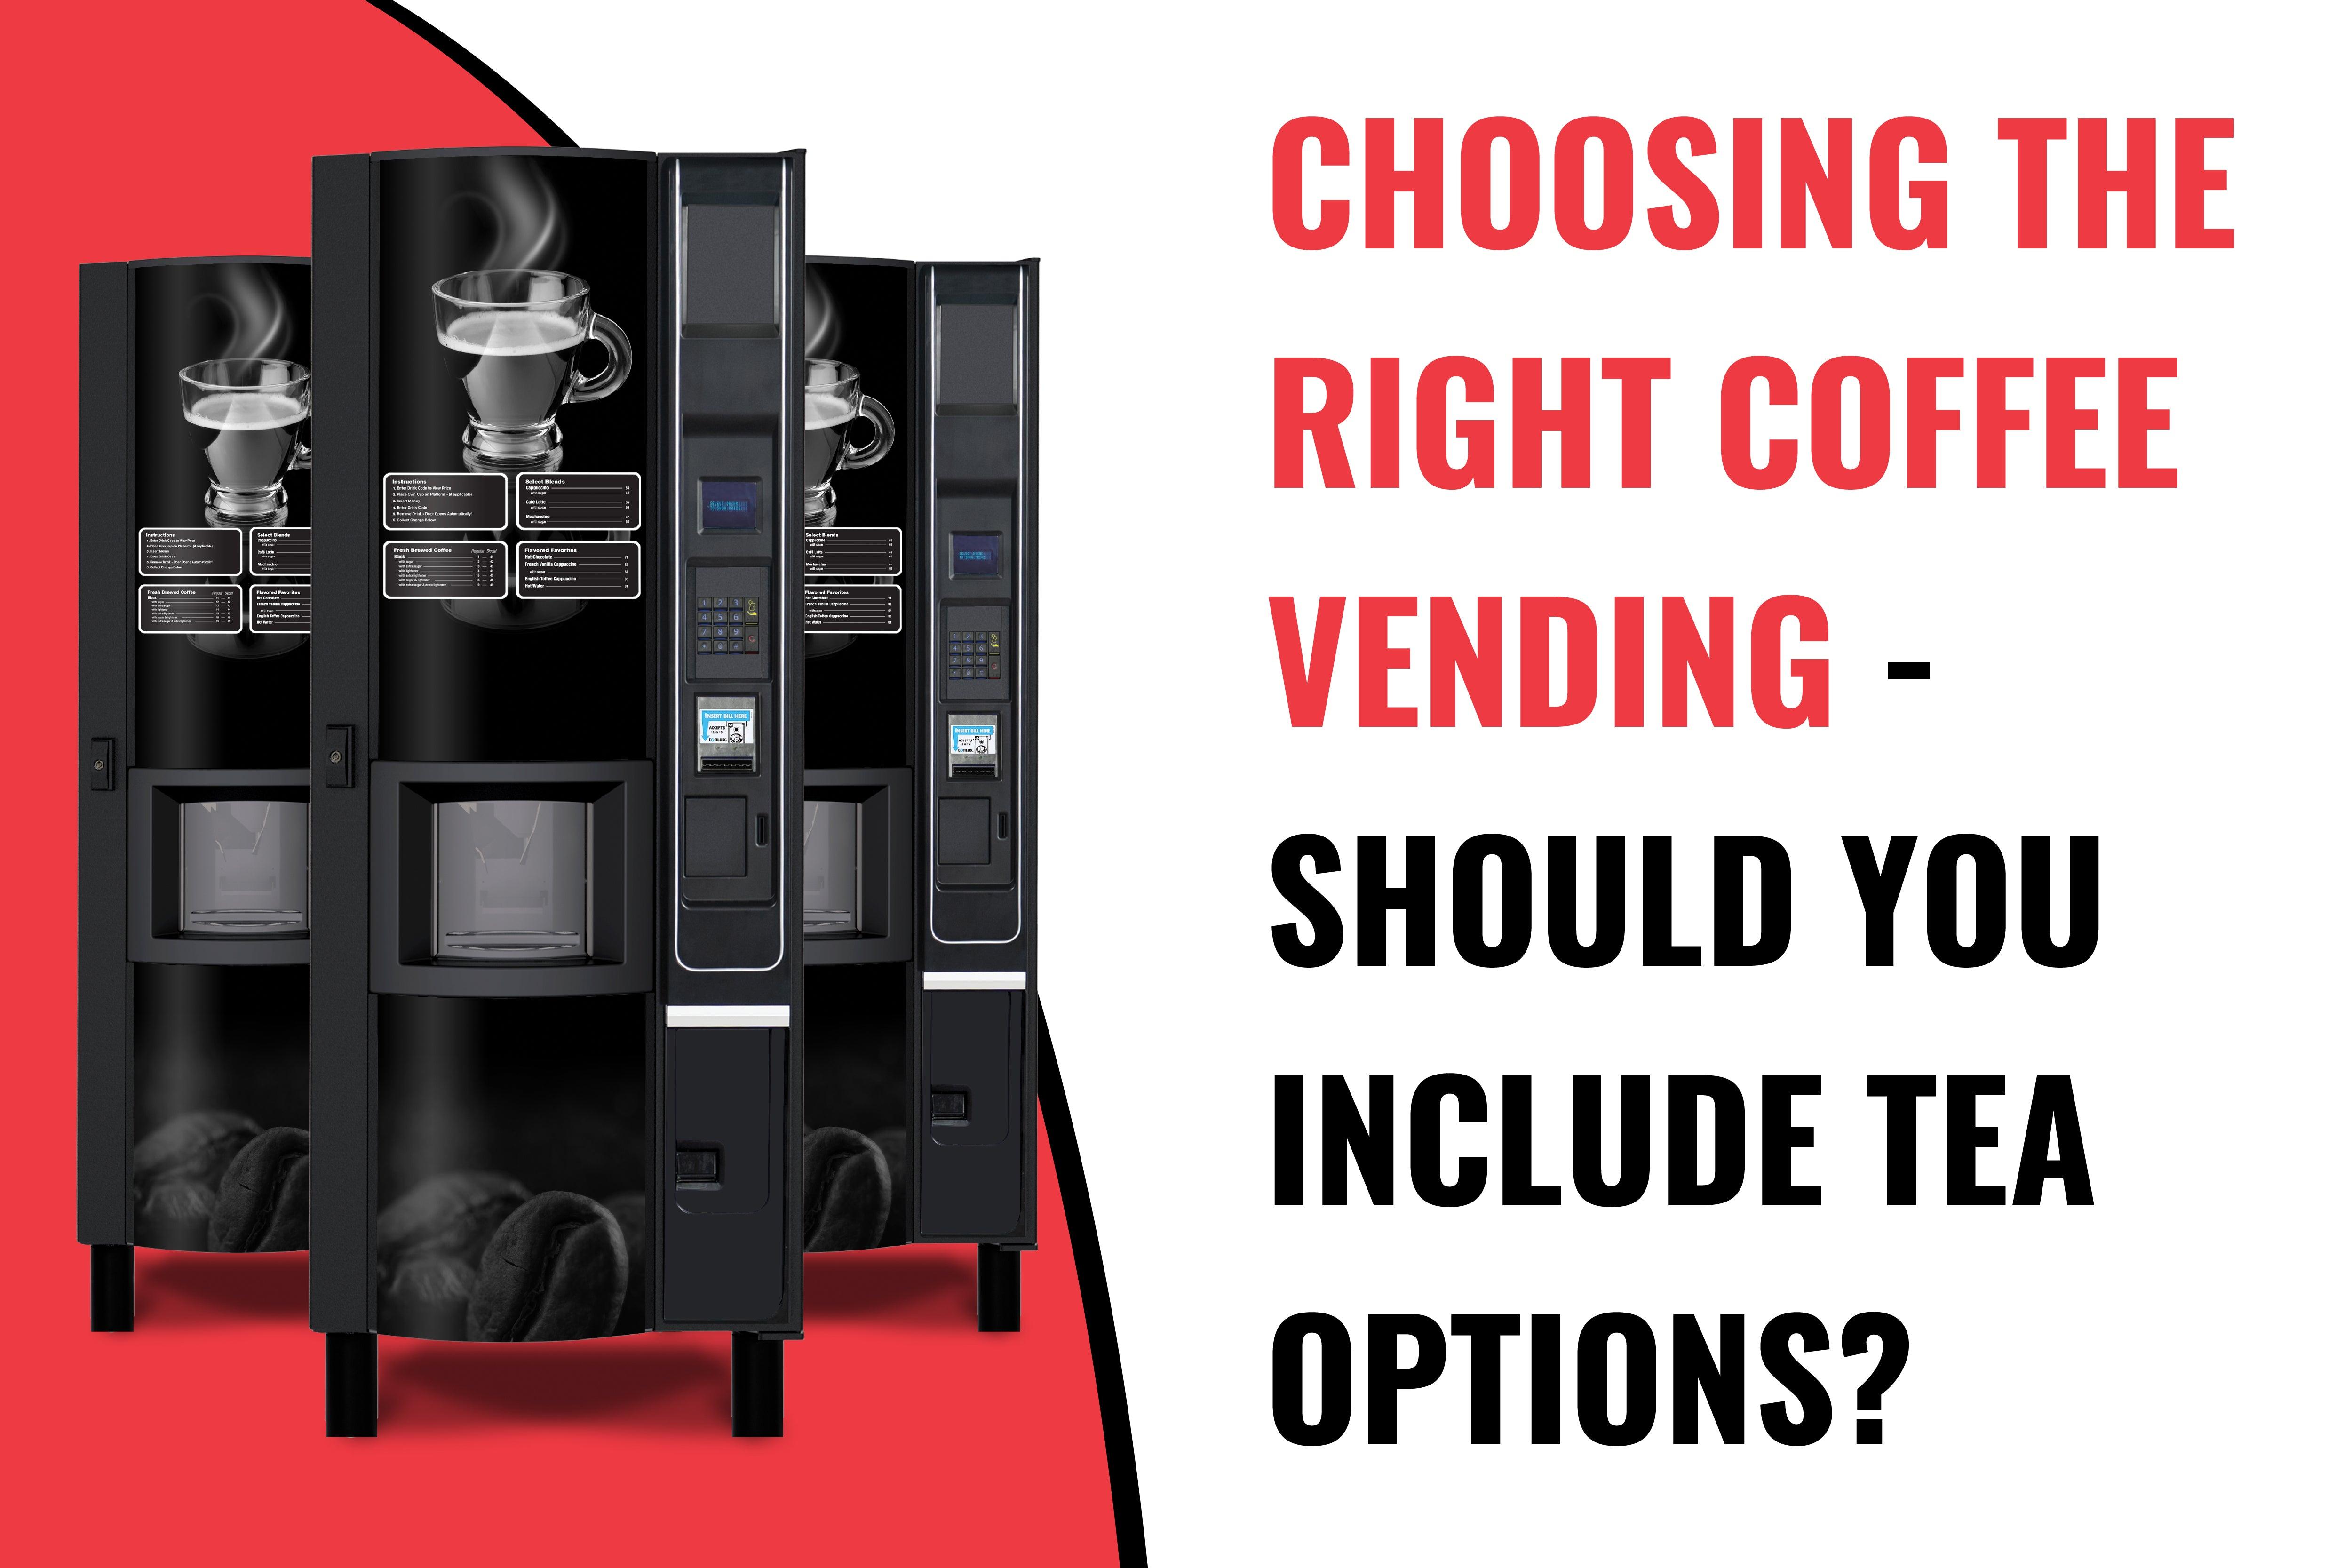 Hot Beverage Vending: Choosing the Right Coffee Vending - Should You Include Tea Options? - Vendnet